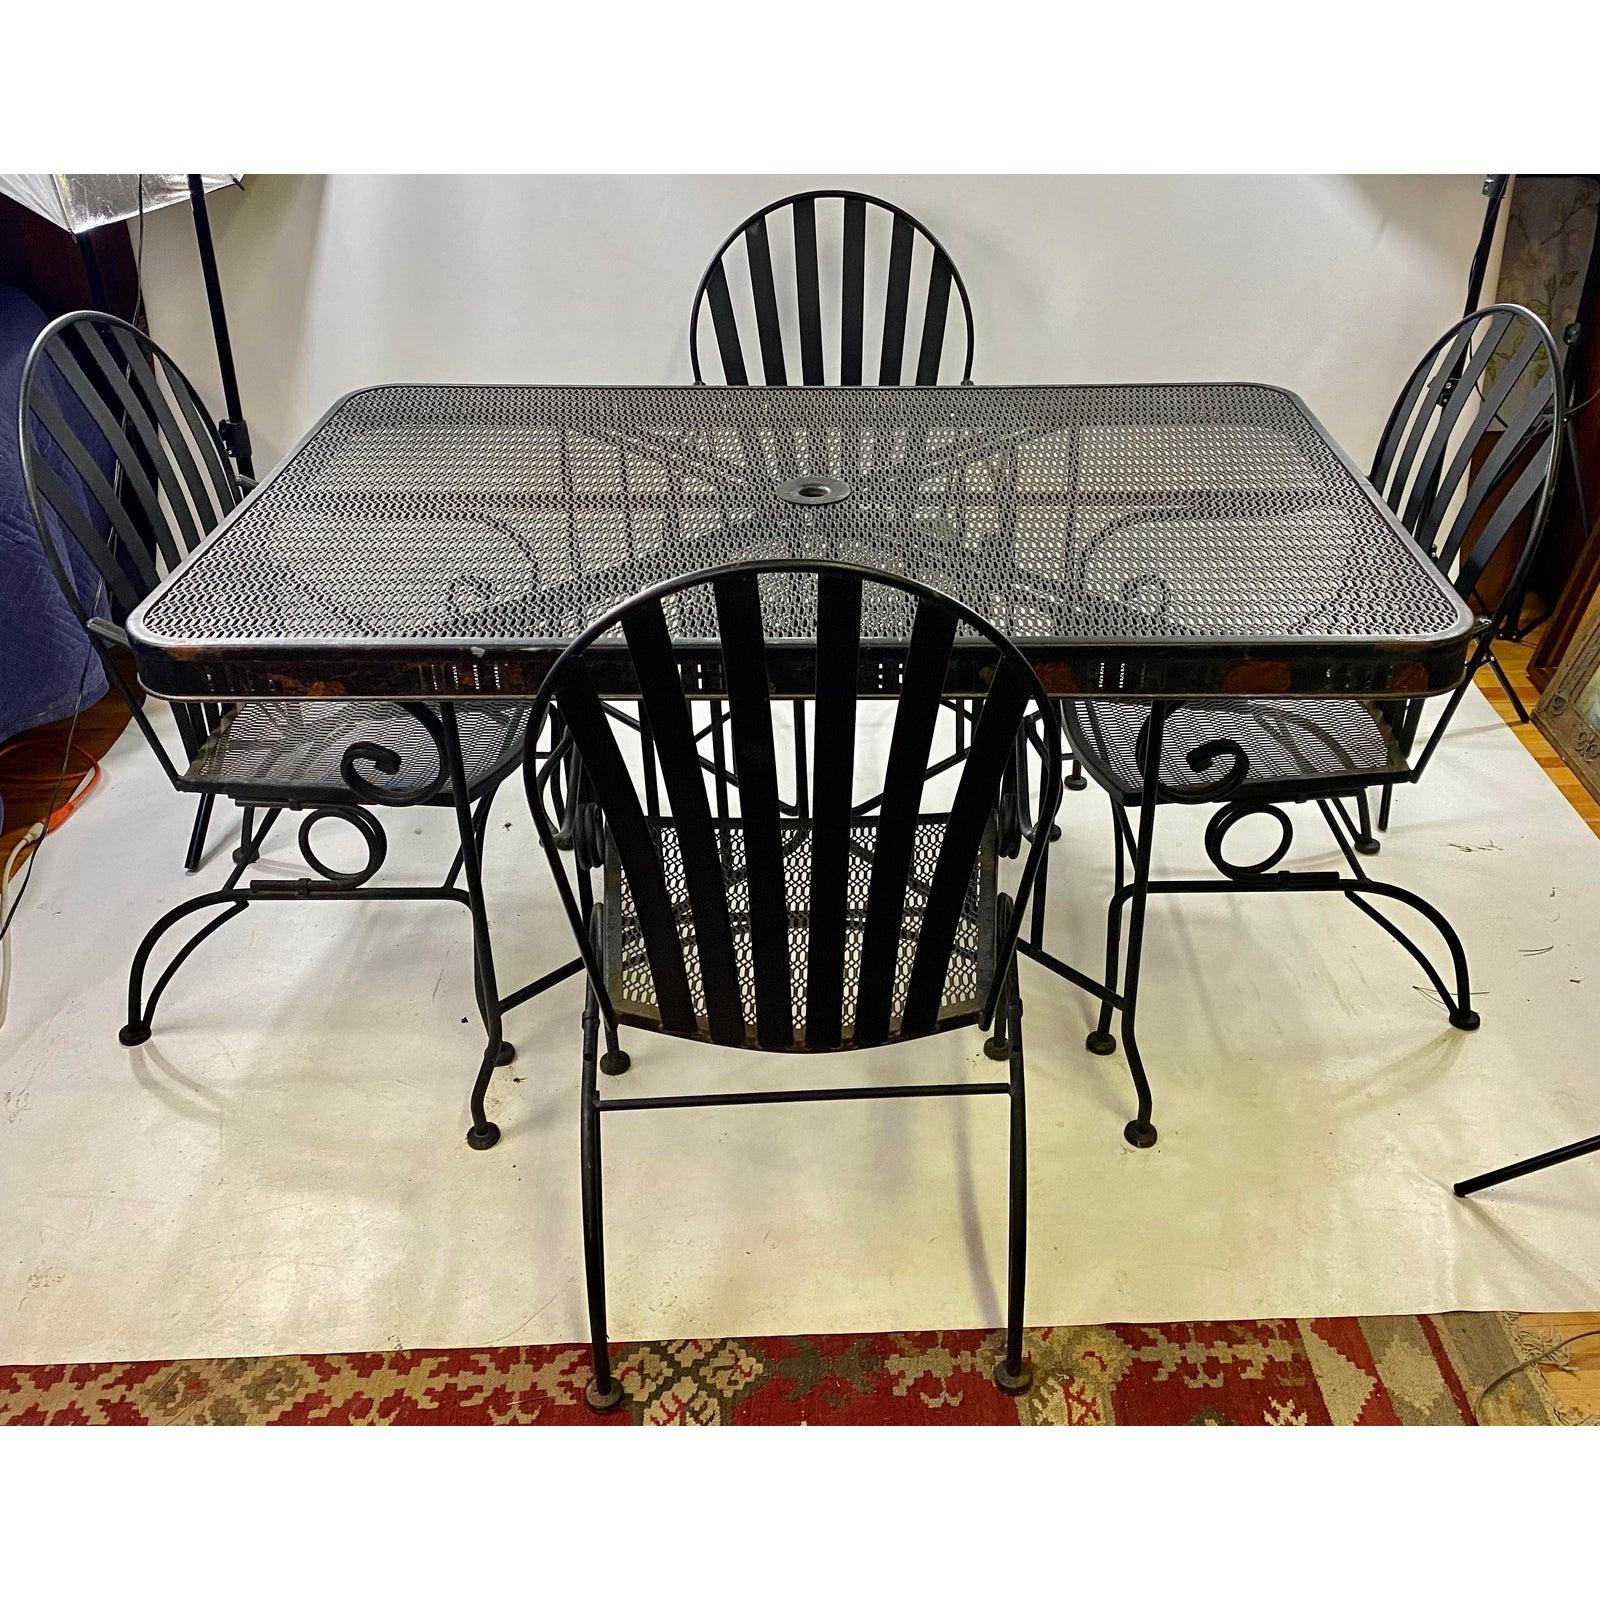 Mid-Century Modern Heavy CastIron Outdoor Dining Set - 5 Pieces. Table measurements are: height: 29.25” depth: 38” Width: 60”